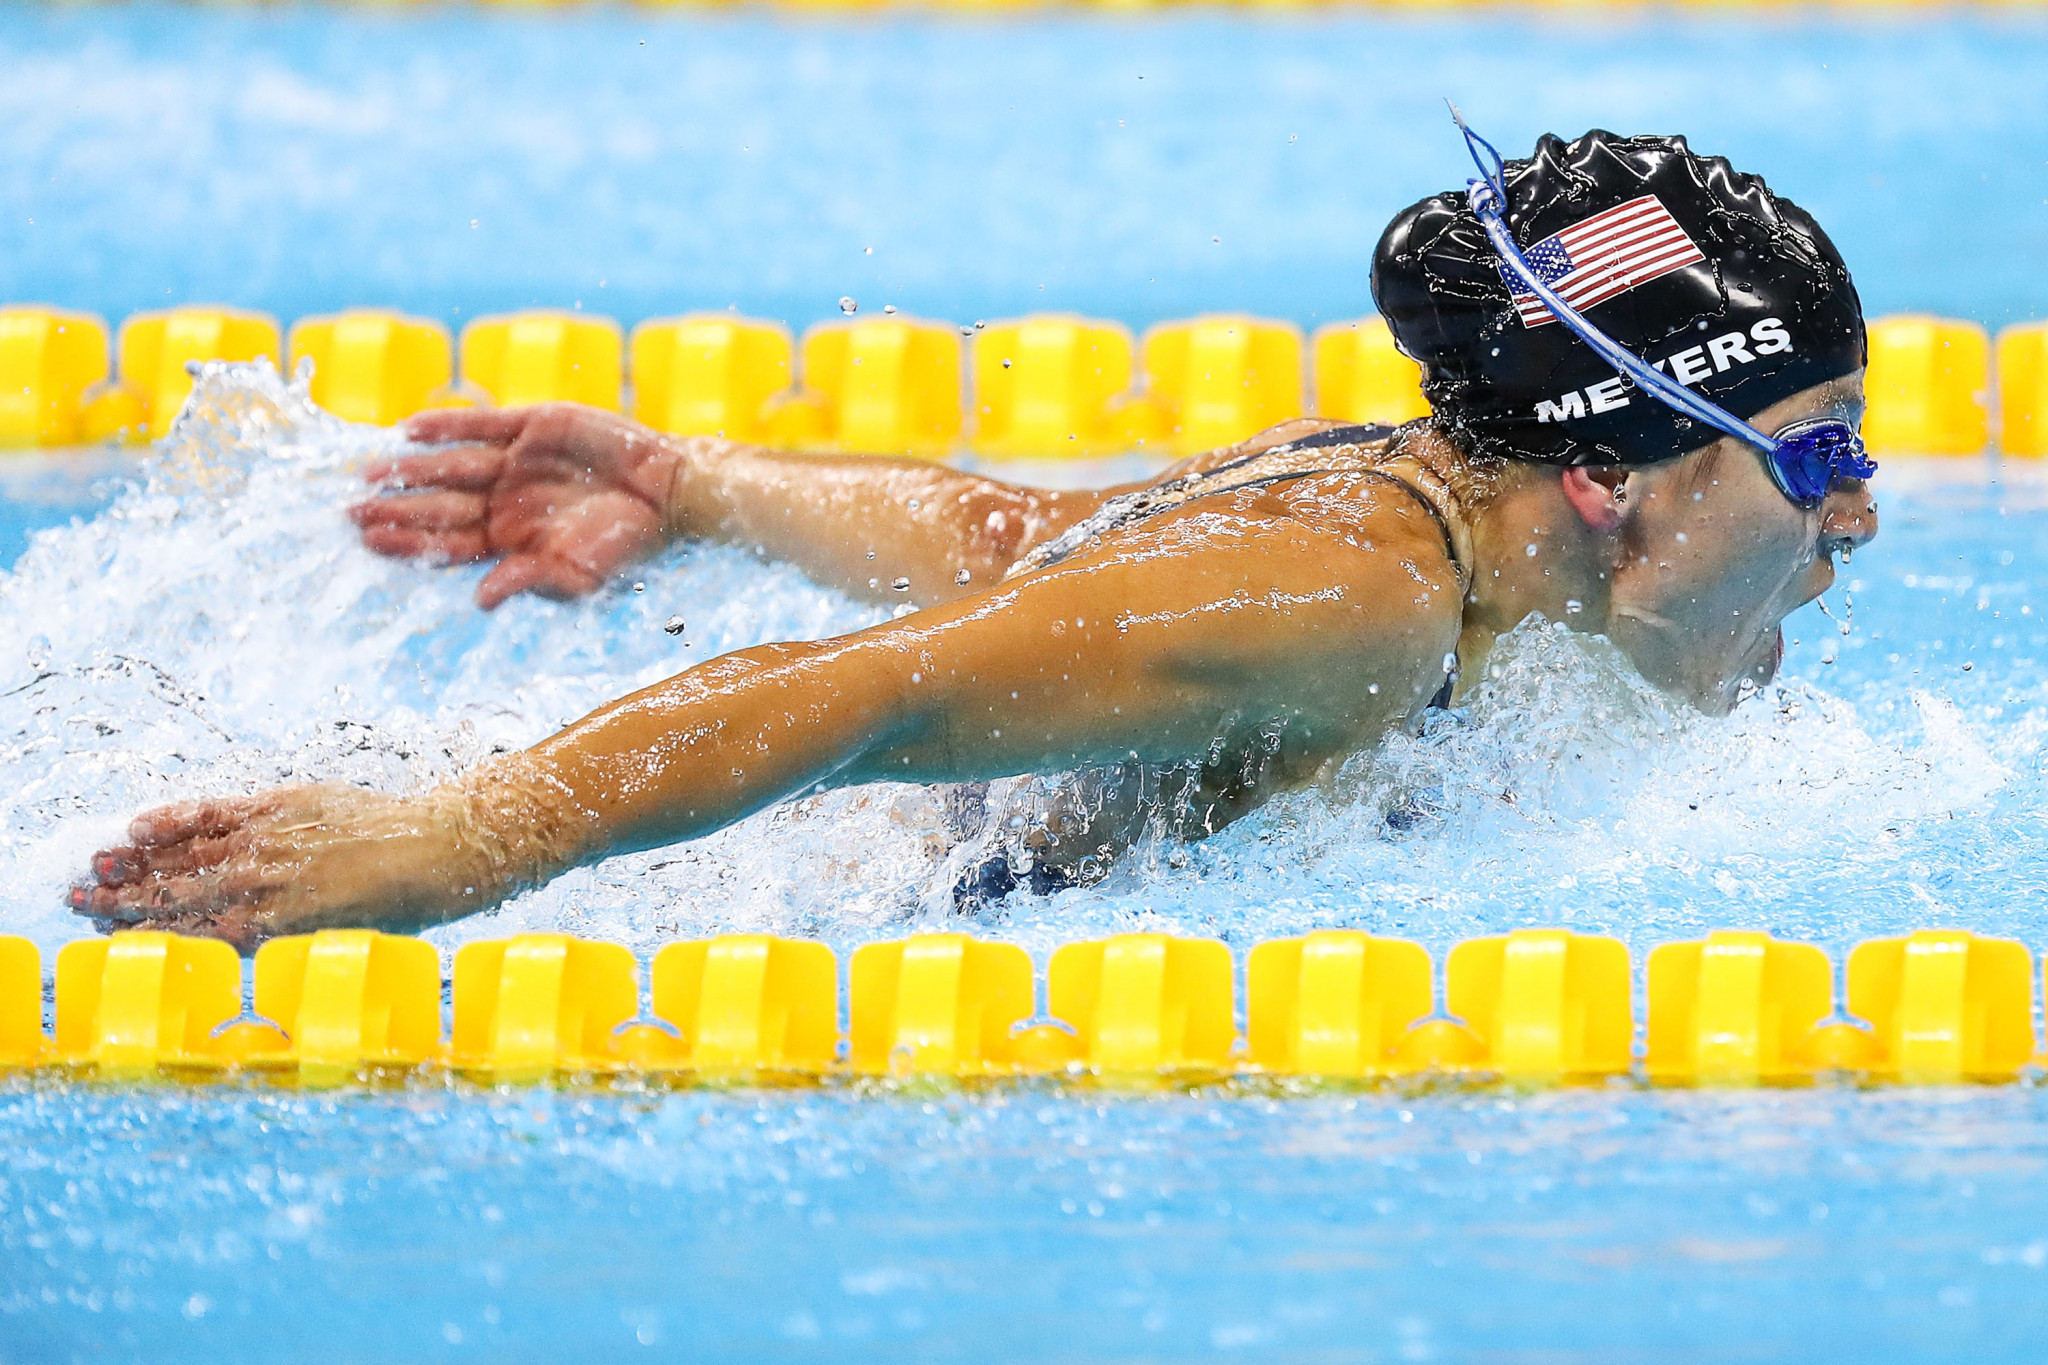 Six-time Paralympic medalist Rebecca Meyers has made the elite A subdivision in the 2019 US Paralympics Swimming National Team ©Getty Images